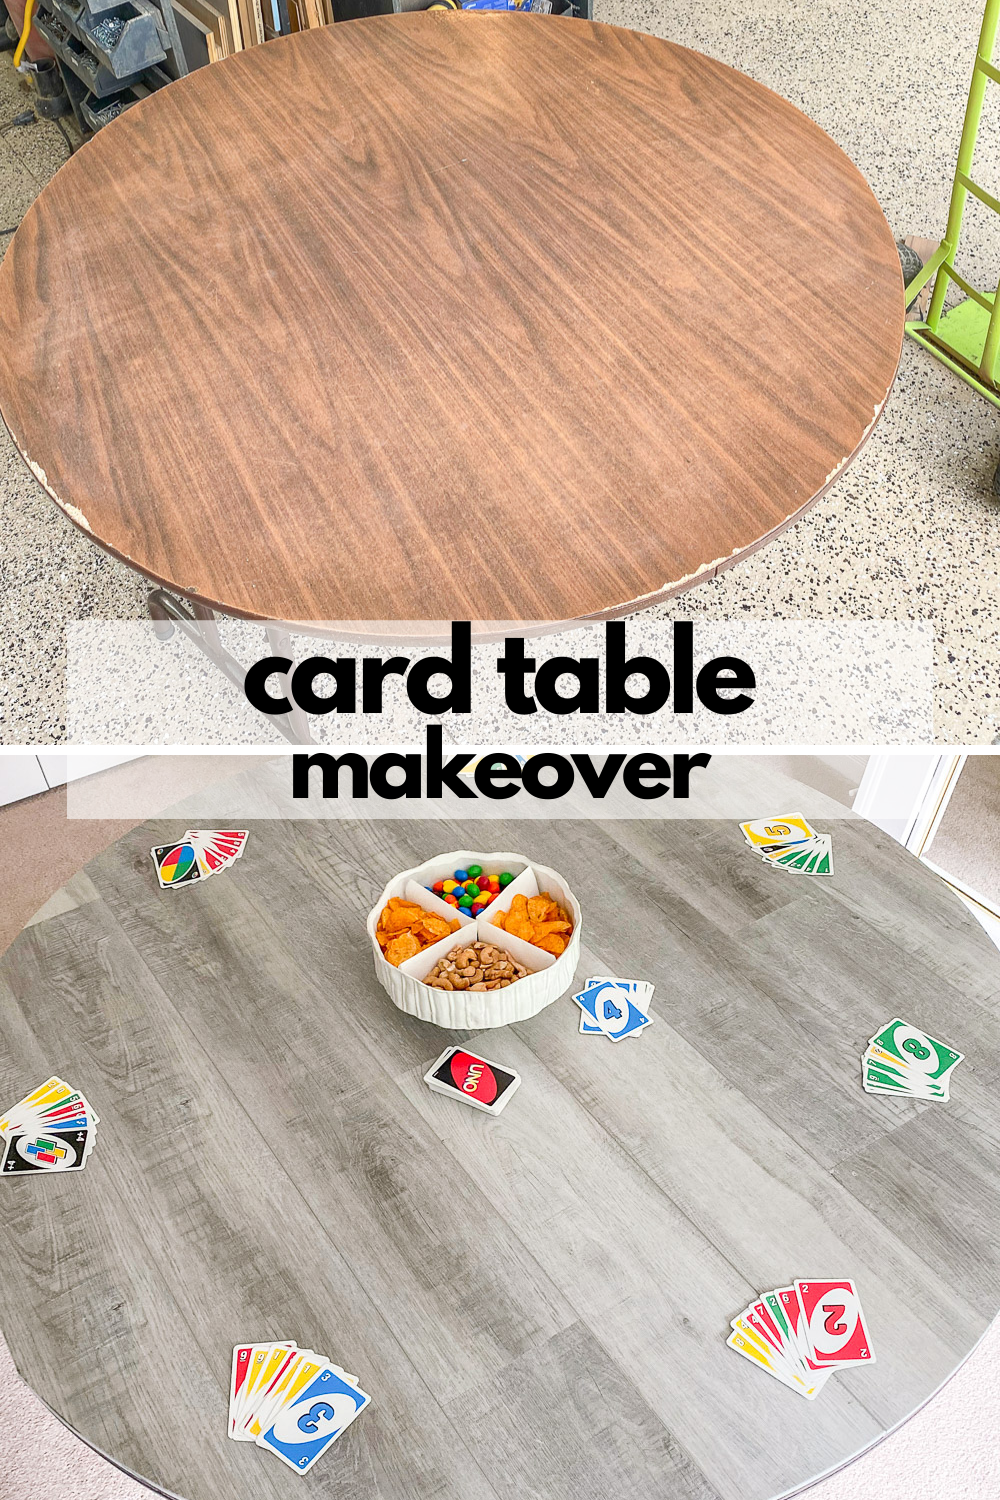 Card table makeover, game table makeover, folding table makeover